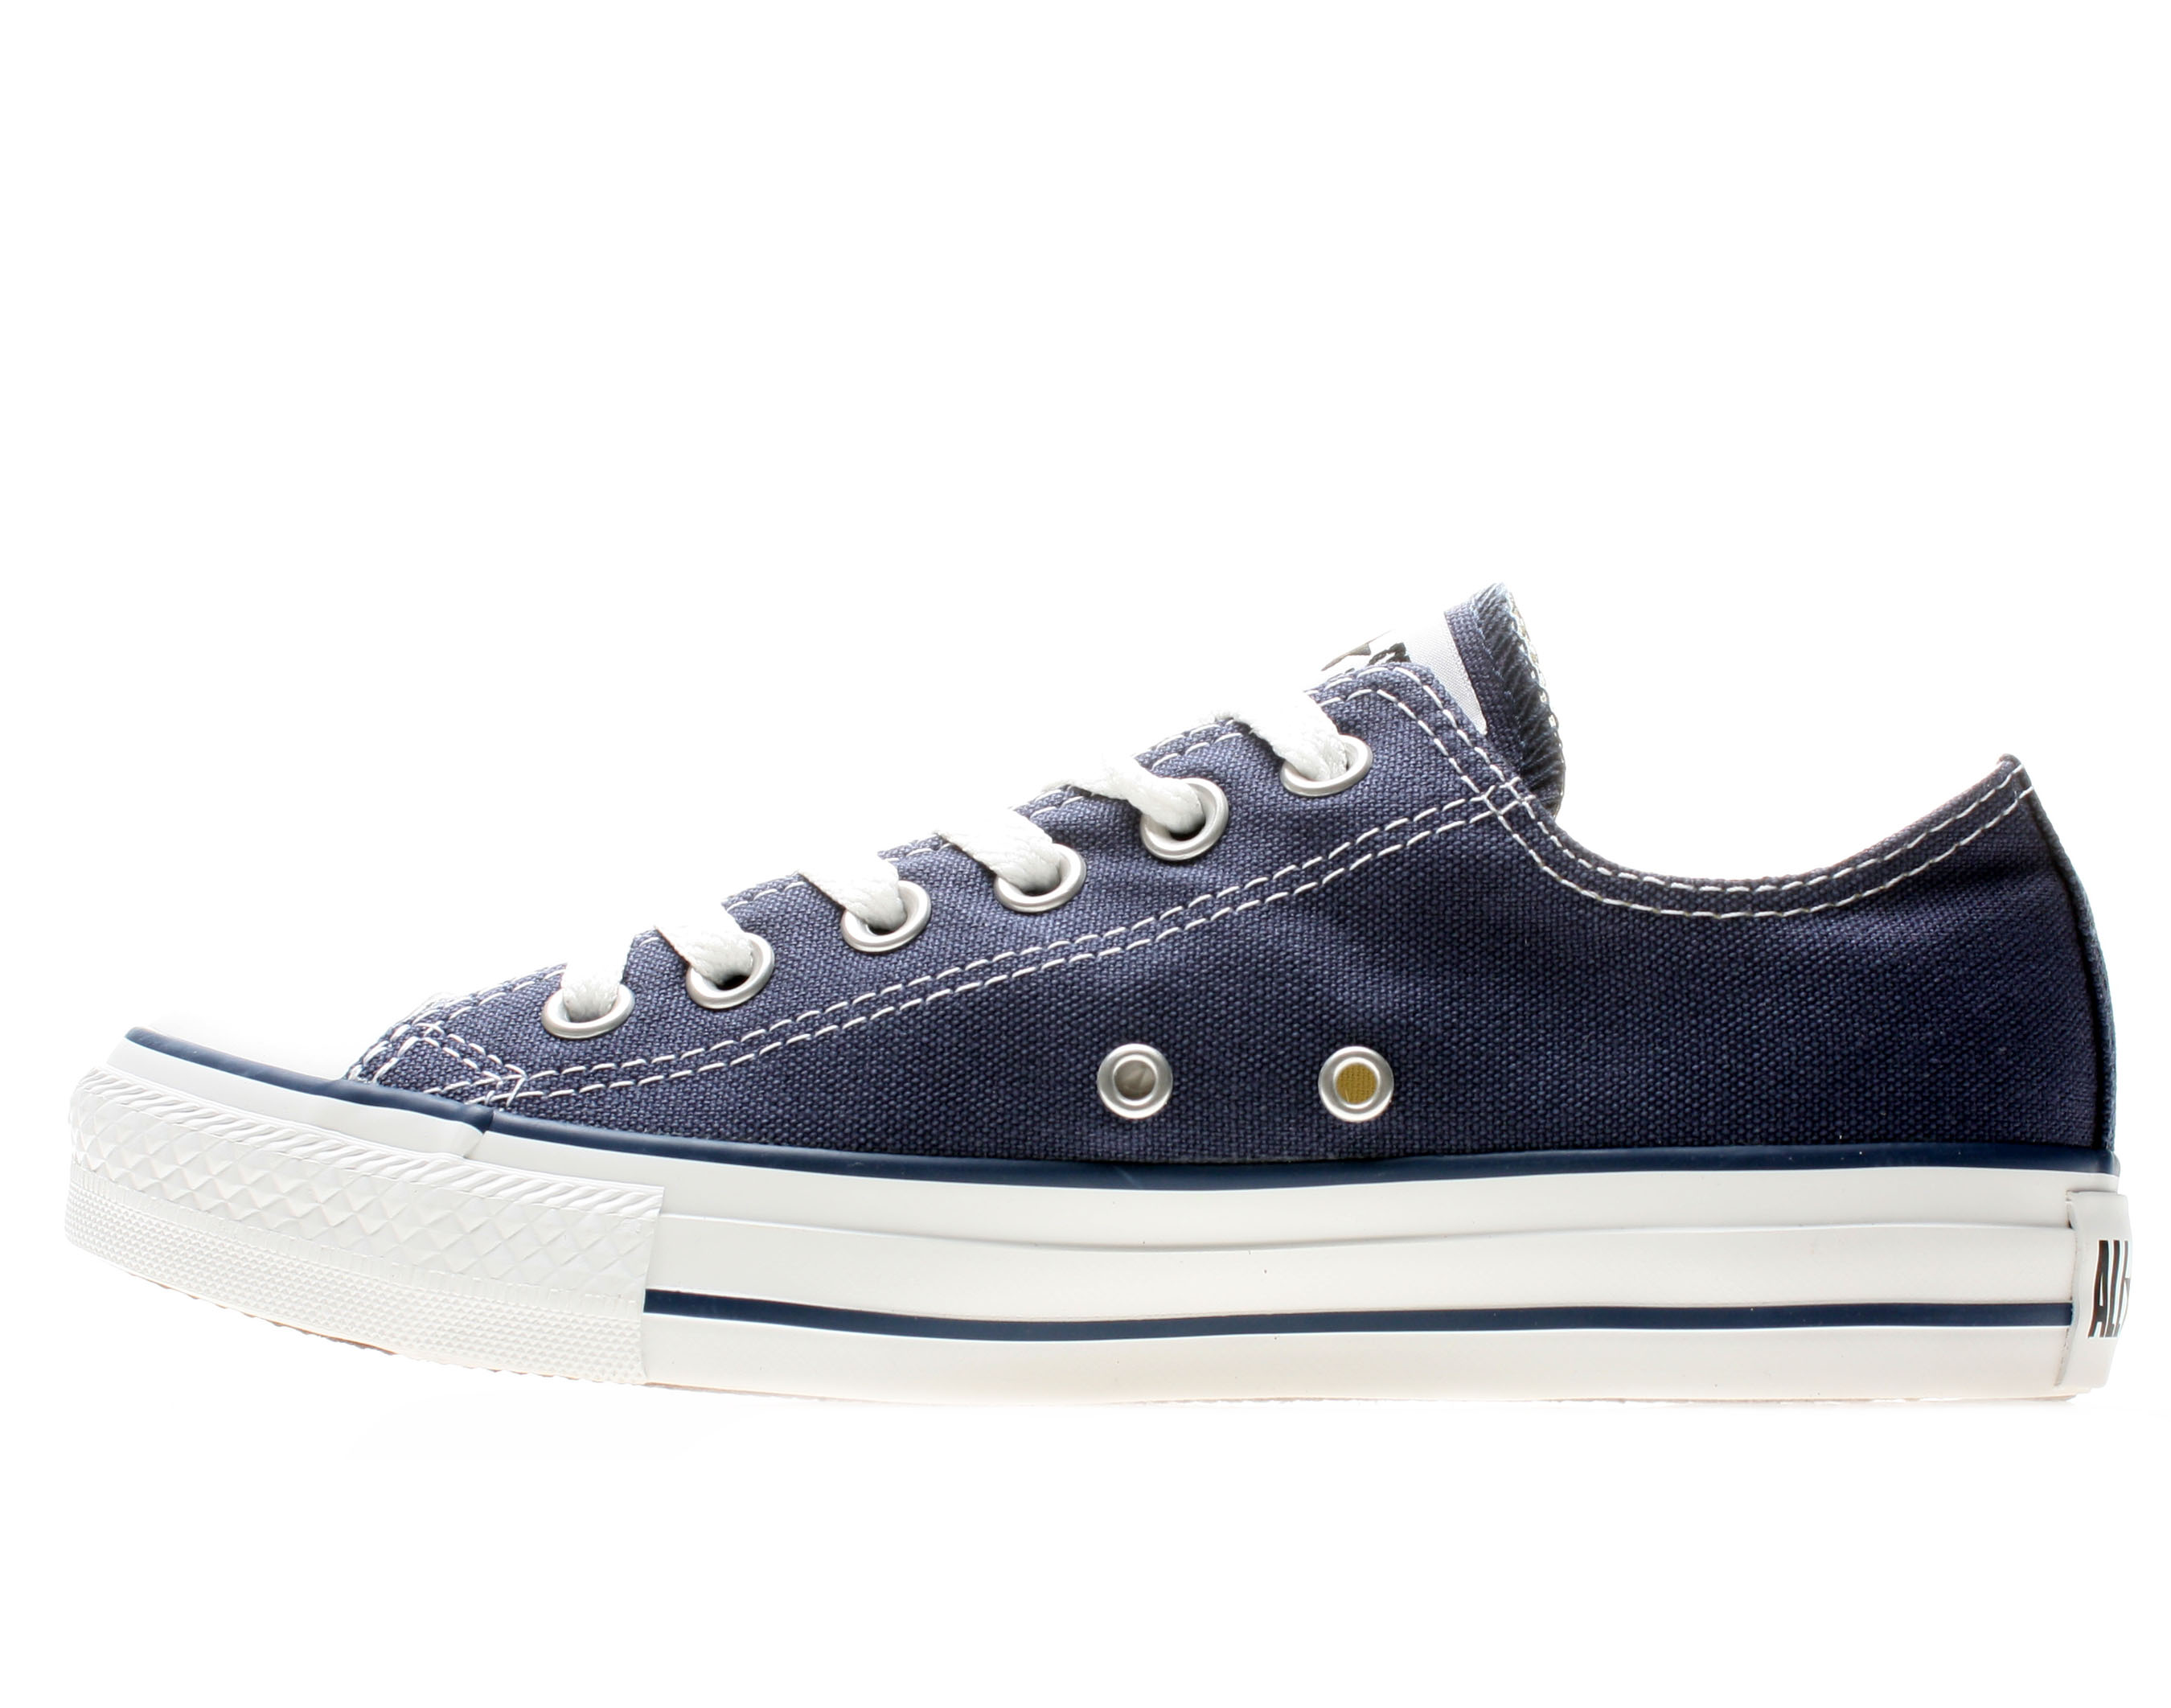 Converse Unisex Chuck low Fashion-Sneakers - image 3 of 6